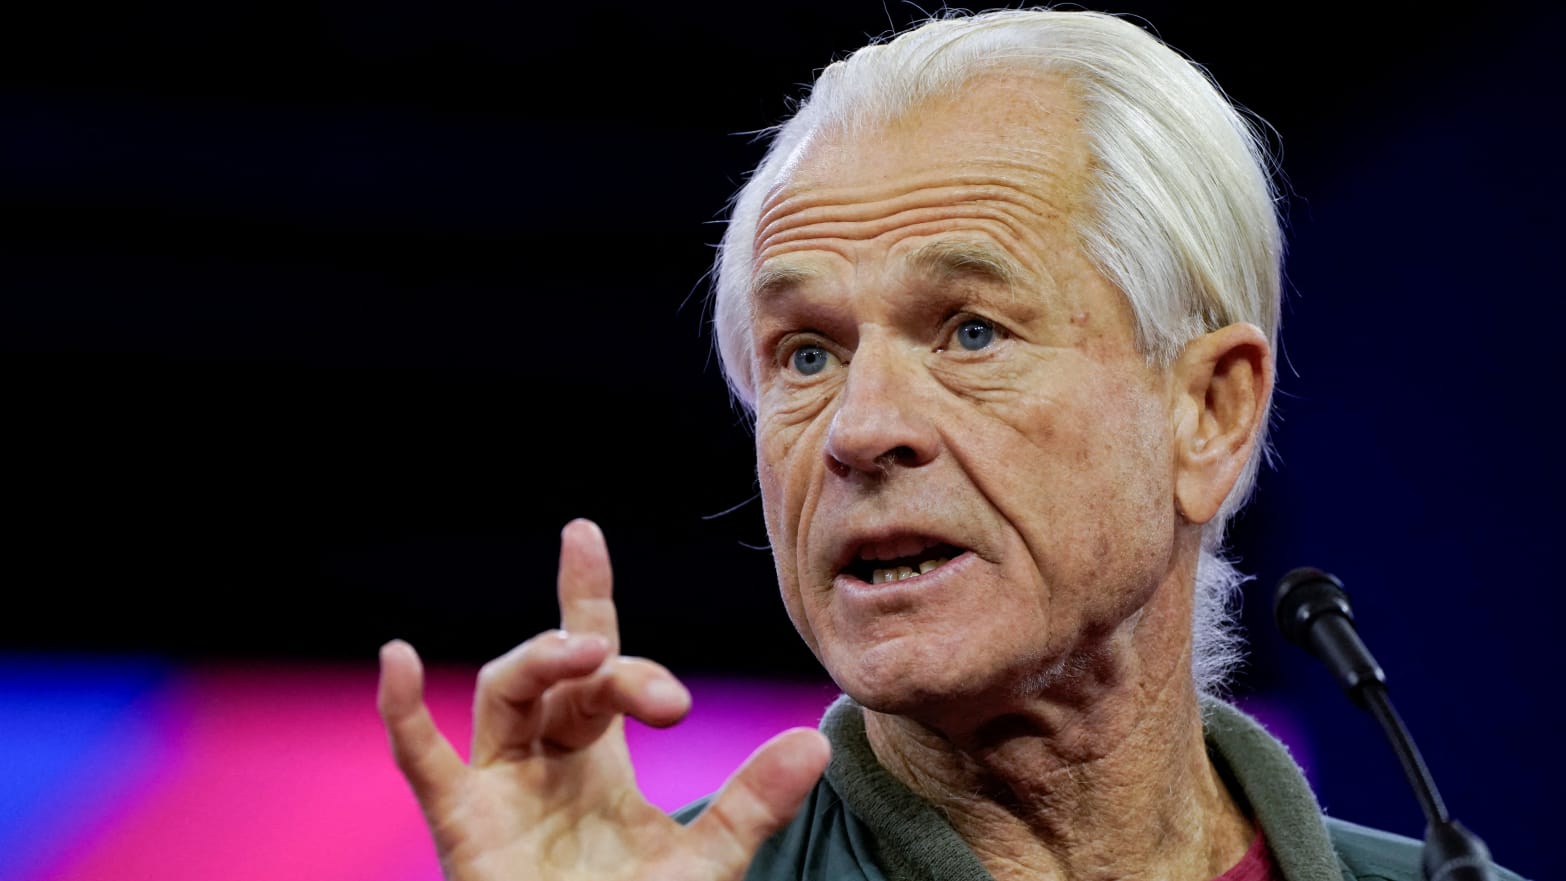 Peter Navarro speaks on stage at an event with his right hand raised.